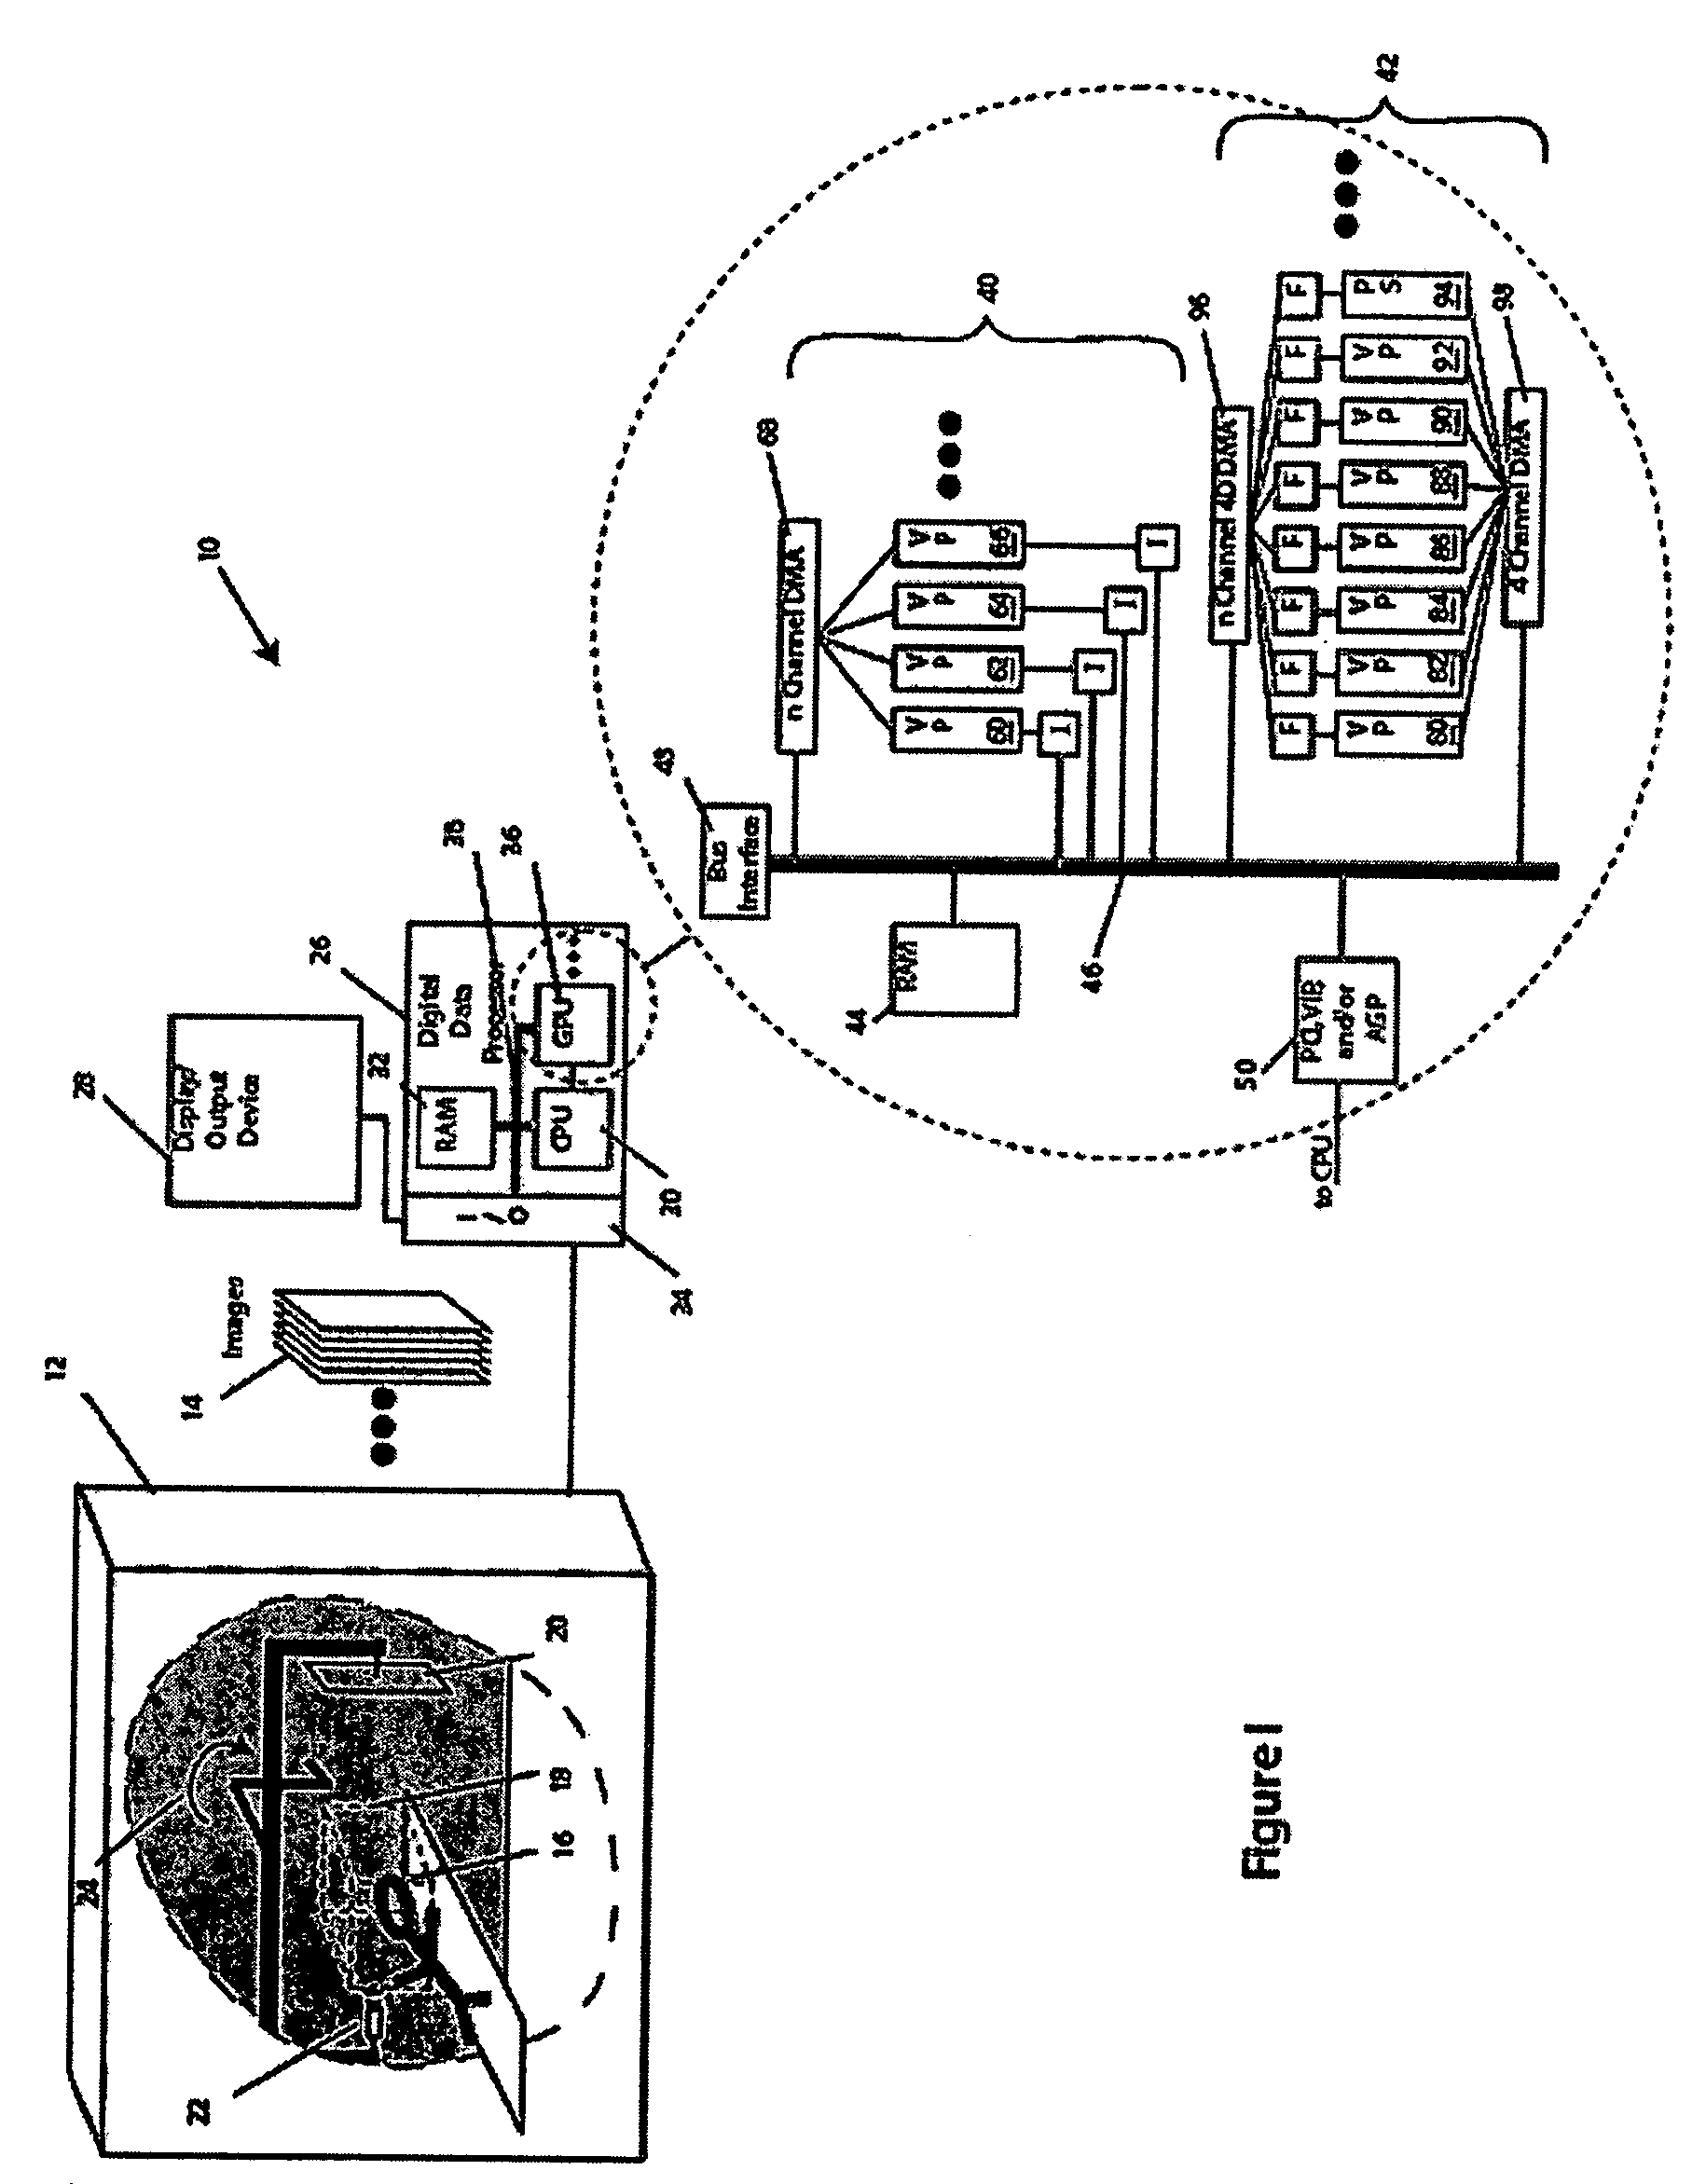 Method and apparatus for reconstruction of 3D image volumes from projection images